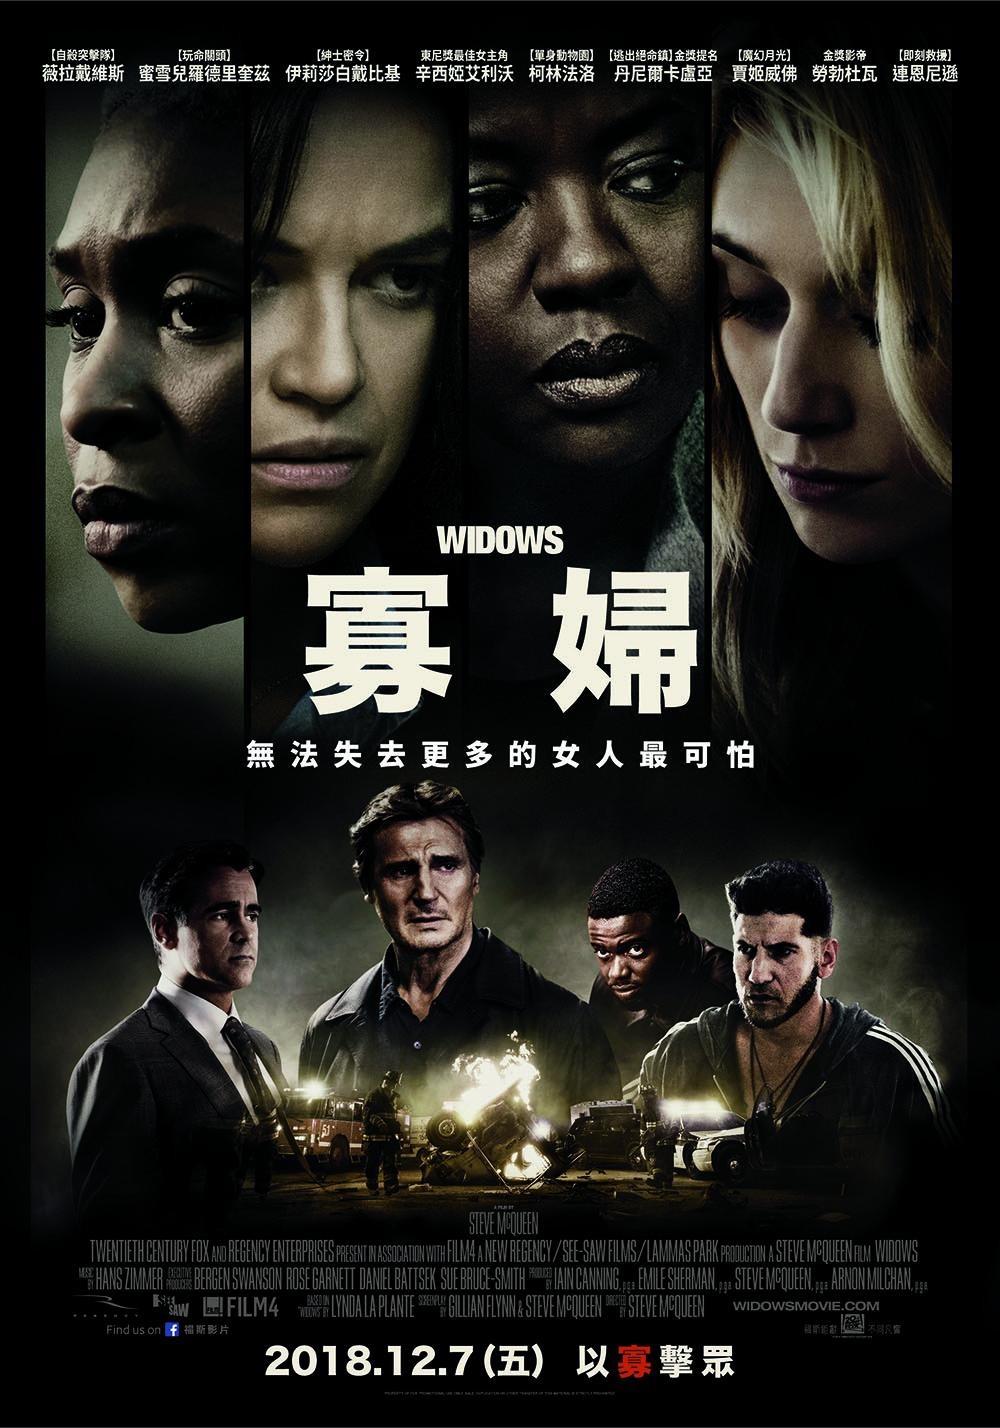 Extra Large Movie Poster Image for Widows (#3 of 3)